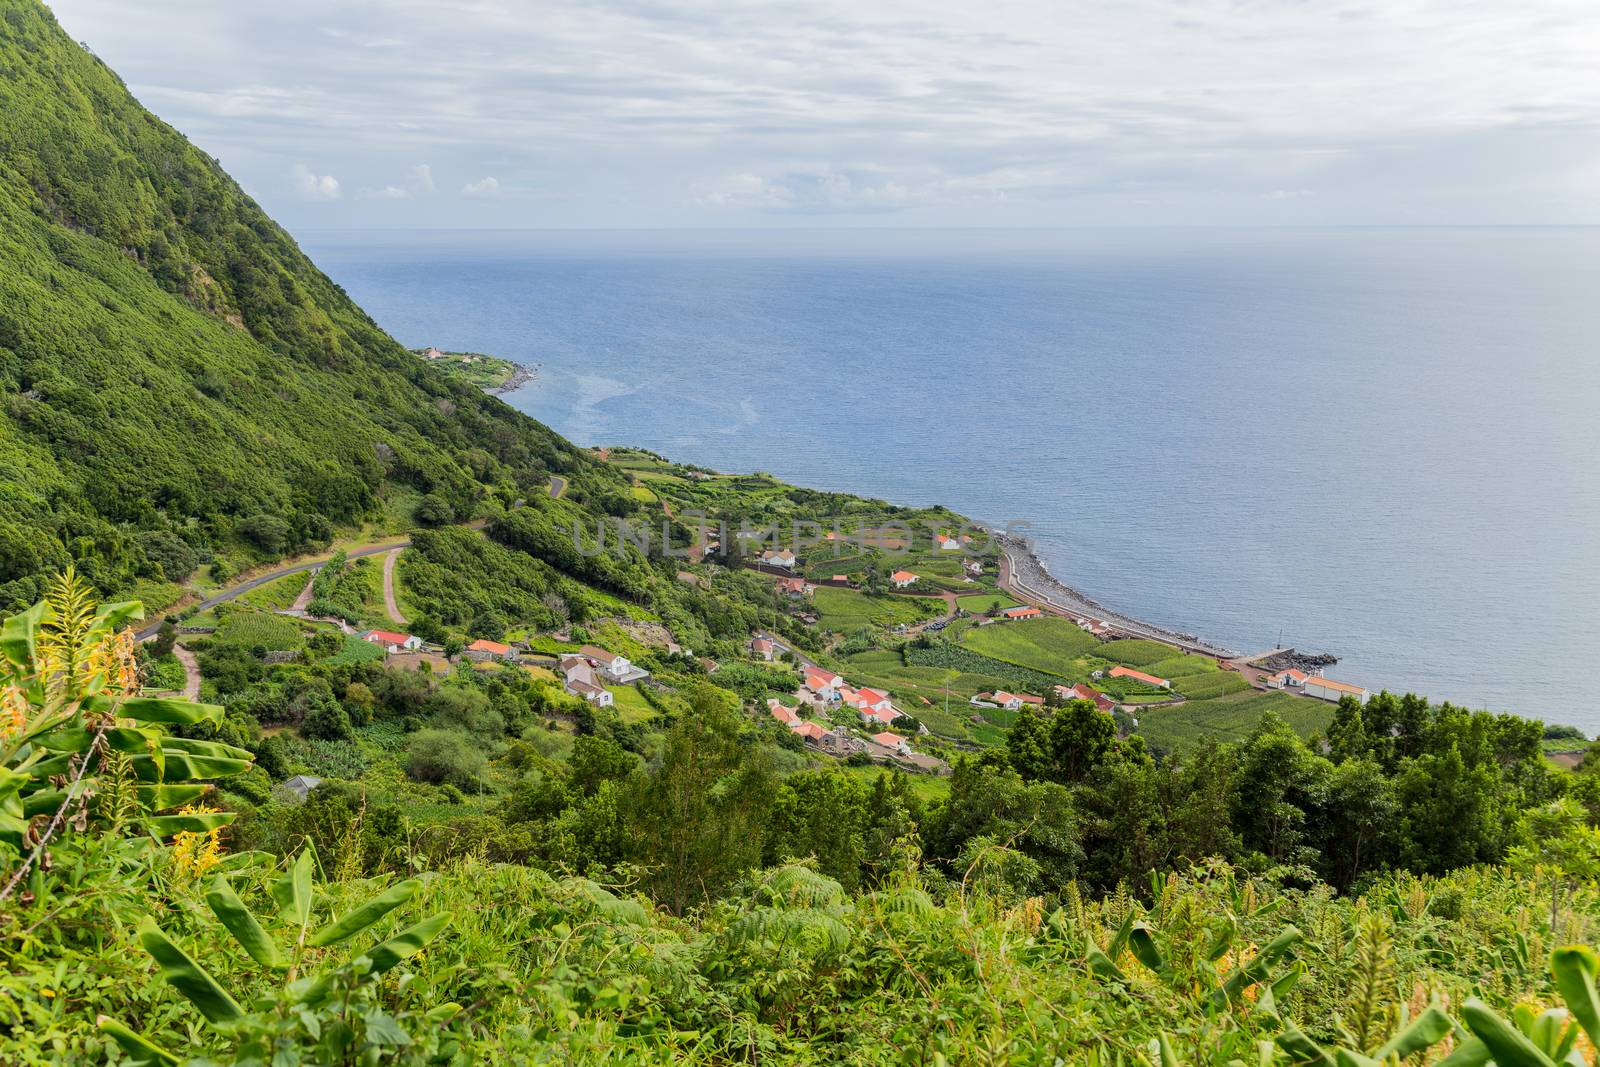 View of the Sao Jorge countryside with the ocean on the background. Azores, Portugal